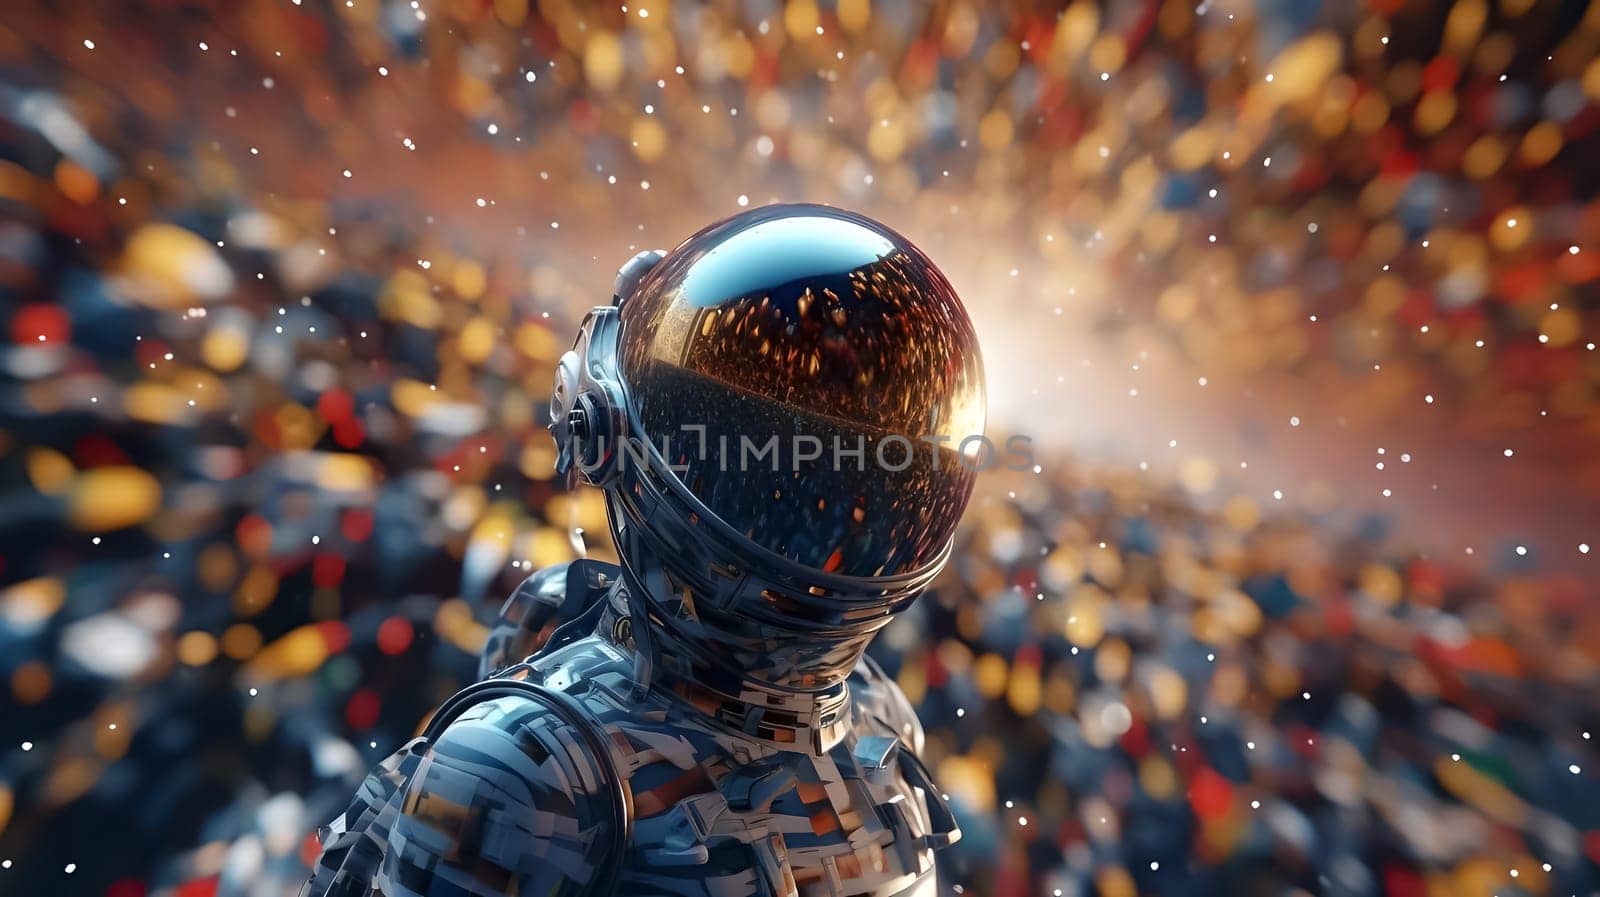 A man in a futuristic spacesuit inside a neural network. Abstraction. The concept of neural networks